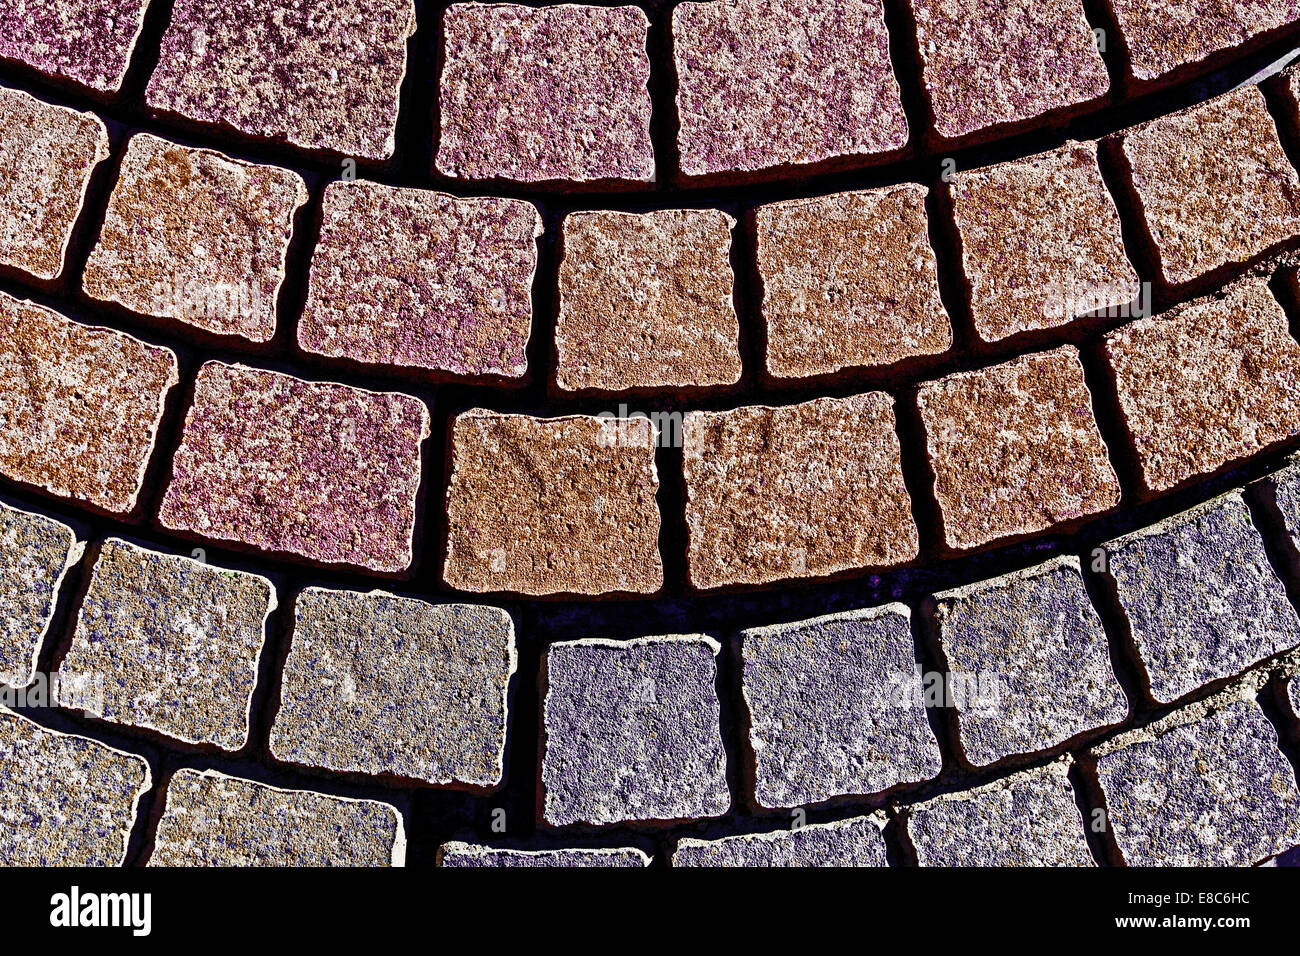 Detail of cobblestone sidewalk made of cubic stones. Stock Photo